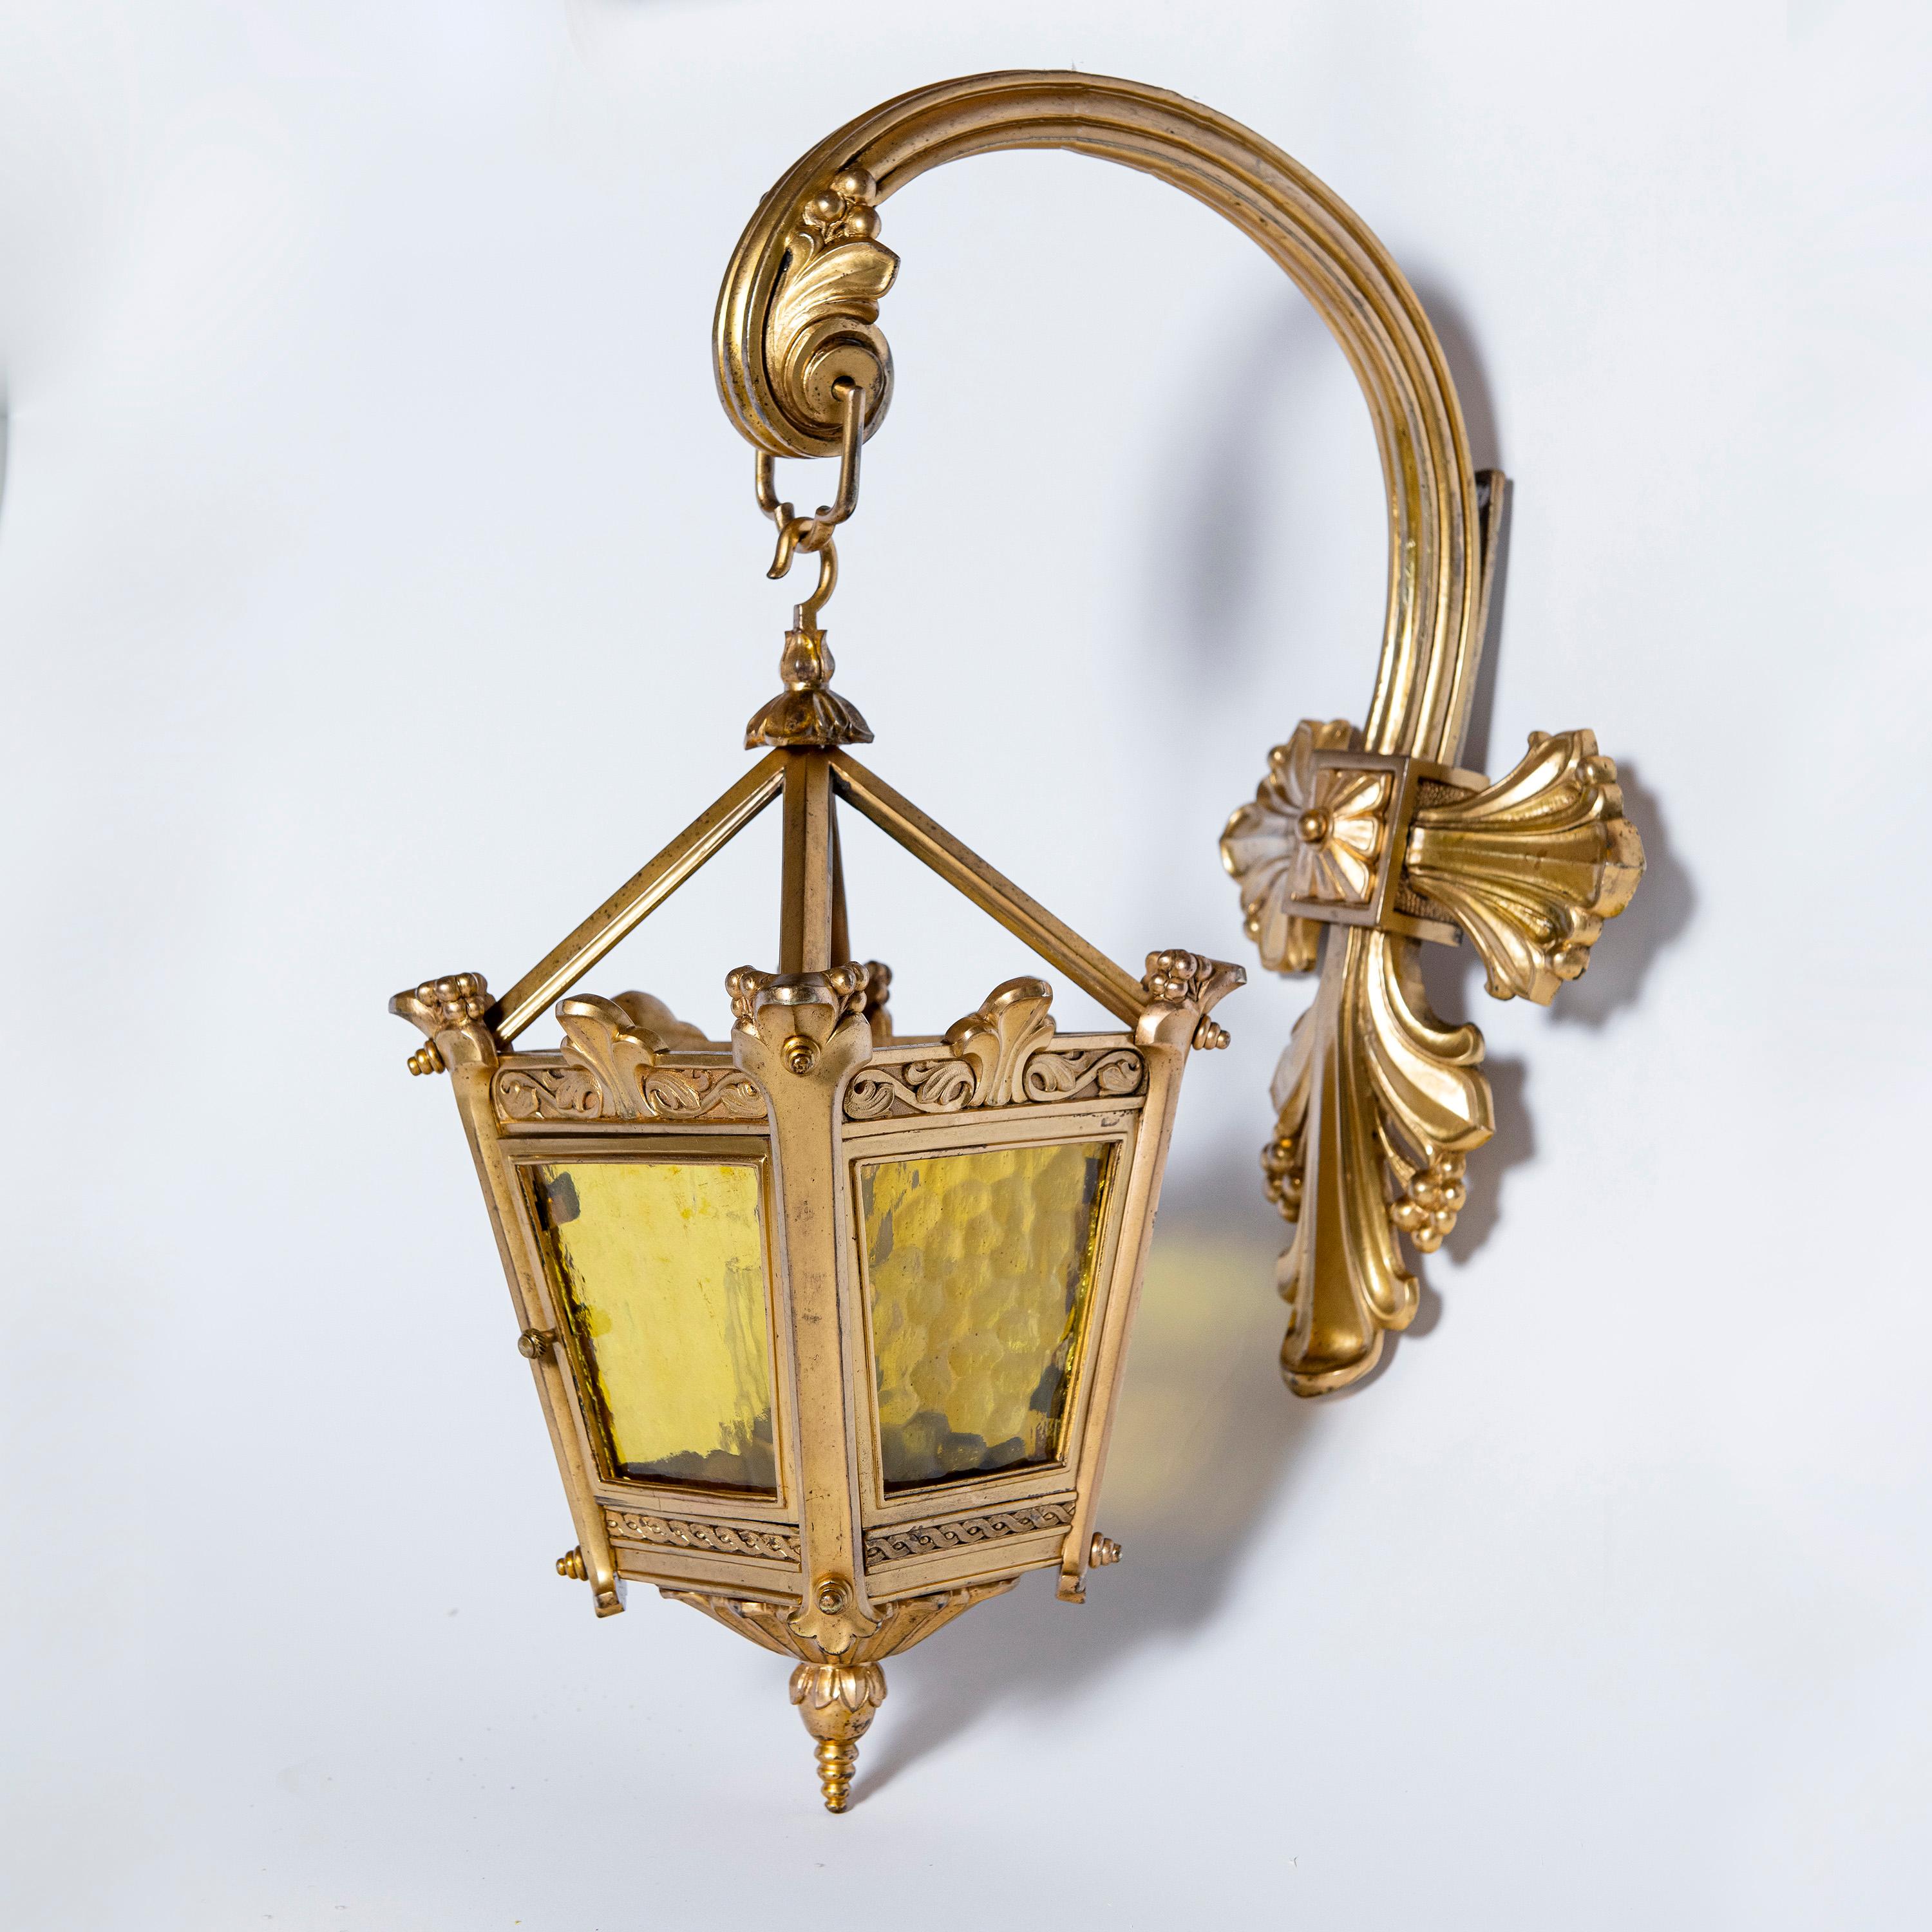 Pair of cast bronze and glass sconces, England, late 19th century.
Works with candles but can be electrified.